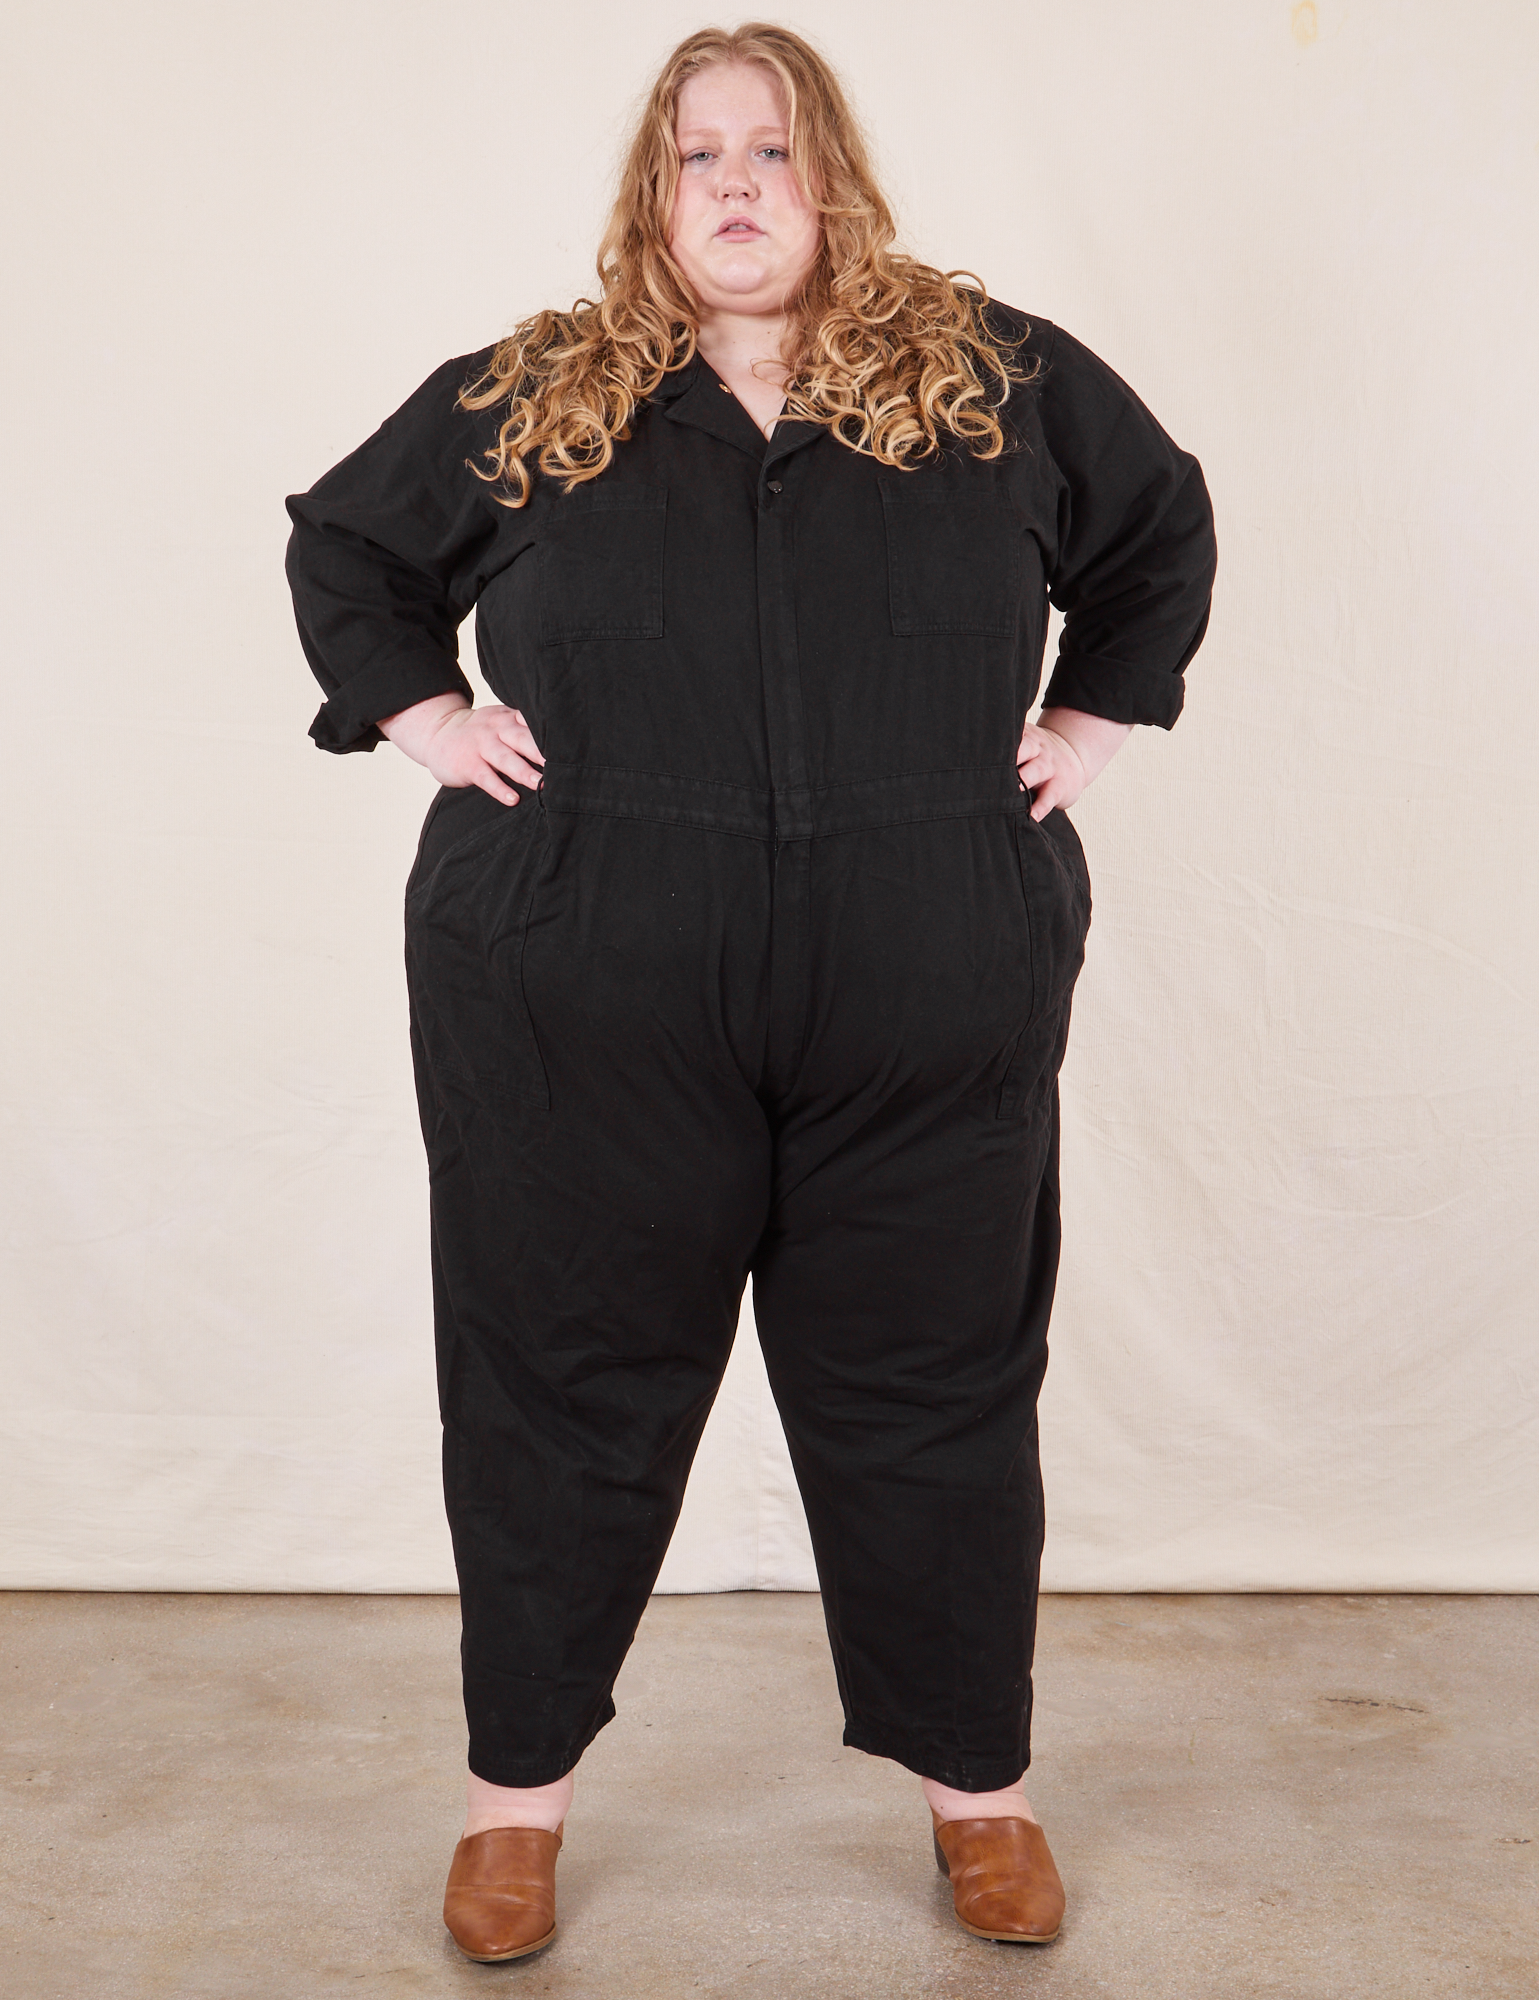 Catie is 5&#39;11&quot; and wearing 5XL Everyday Jumpsuit in Basic Black